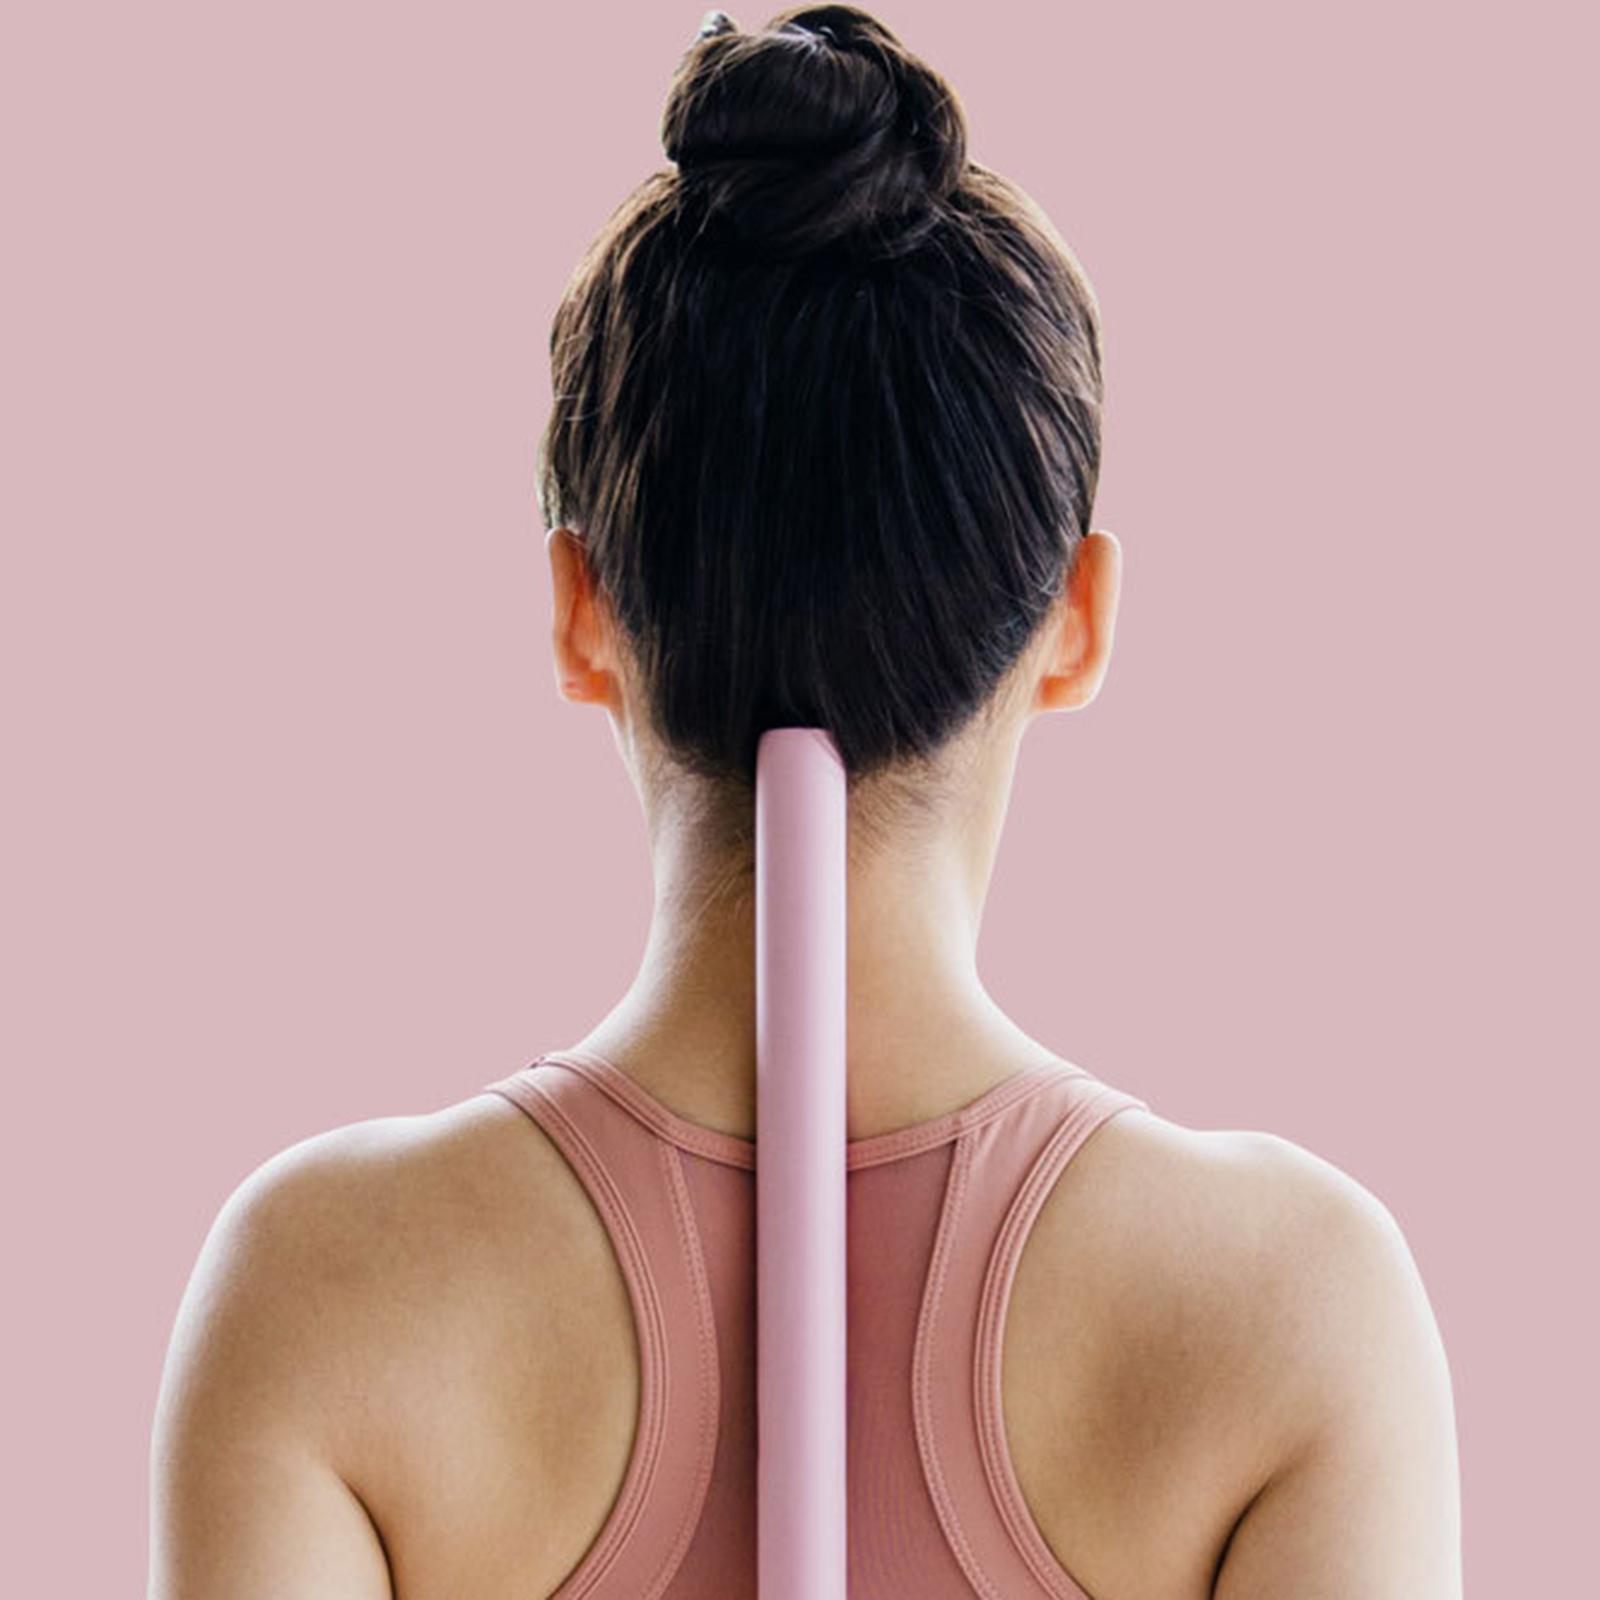 Yoga Sticks Training Lung Opener Stretching Tool for Stretching Home Fitness Pink